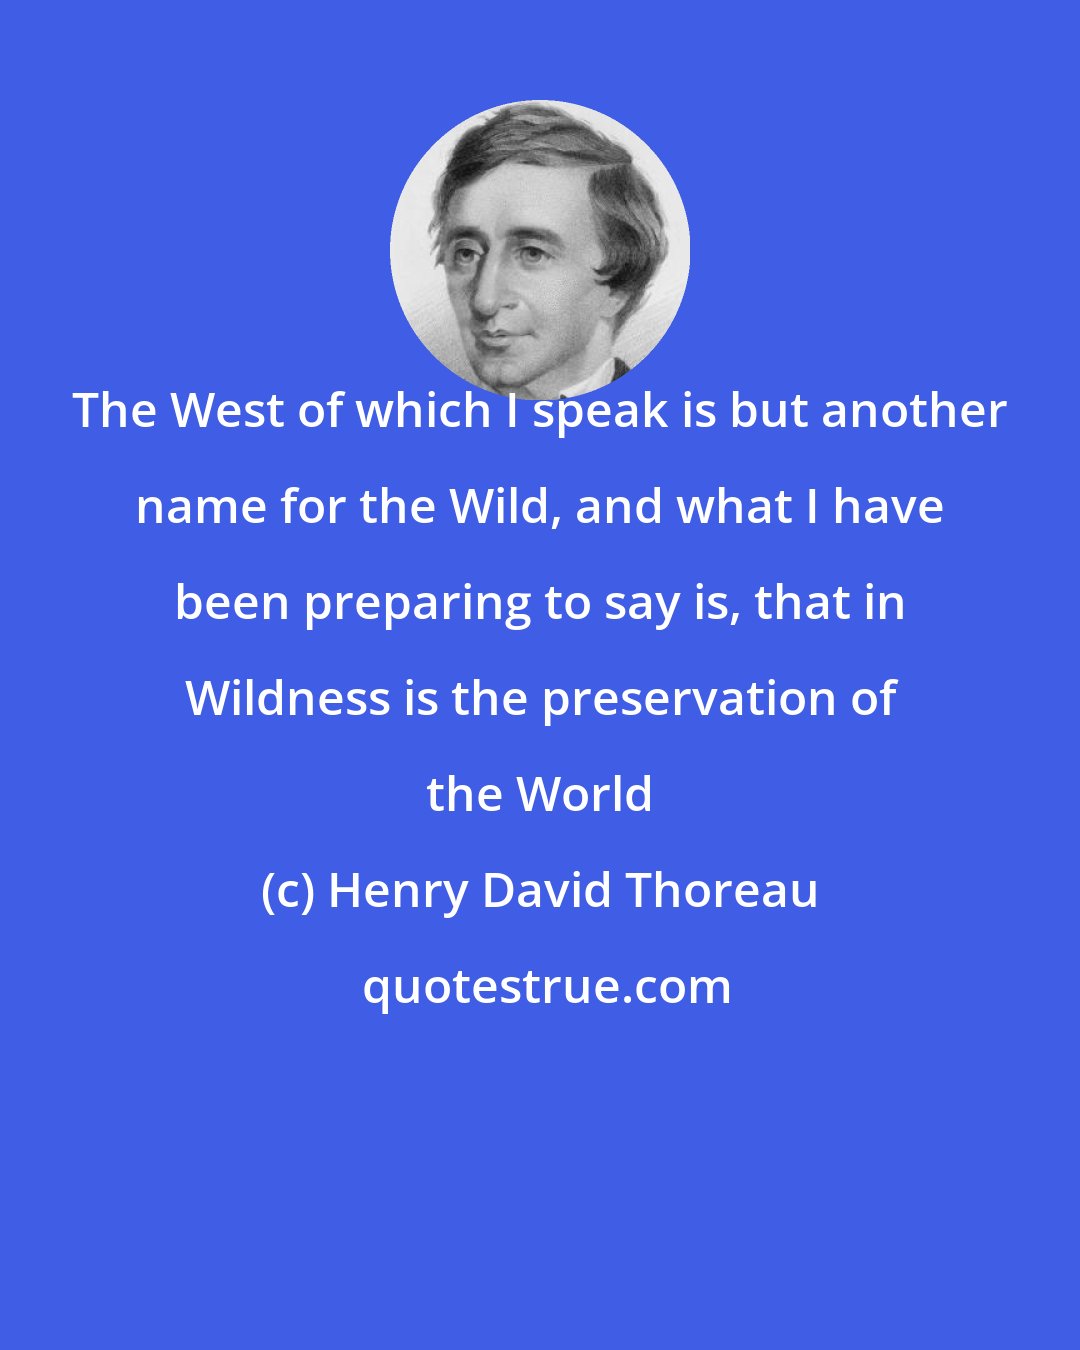 Henry David Thoreau: The West of which I speak is but another name for the Wild, and what I have been preparing to say is, that in Wildness is the preservation of the World